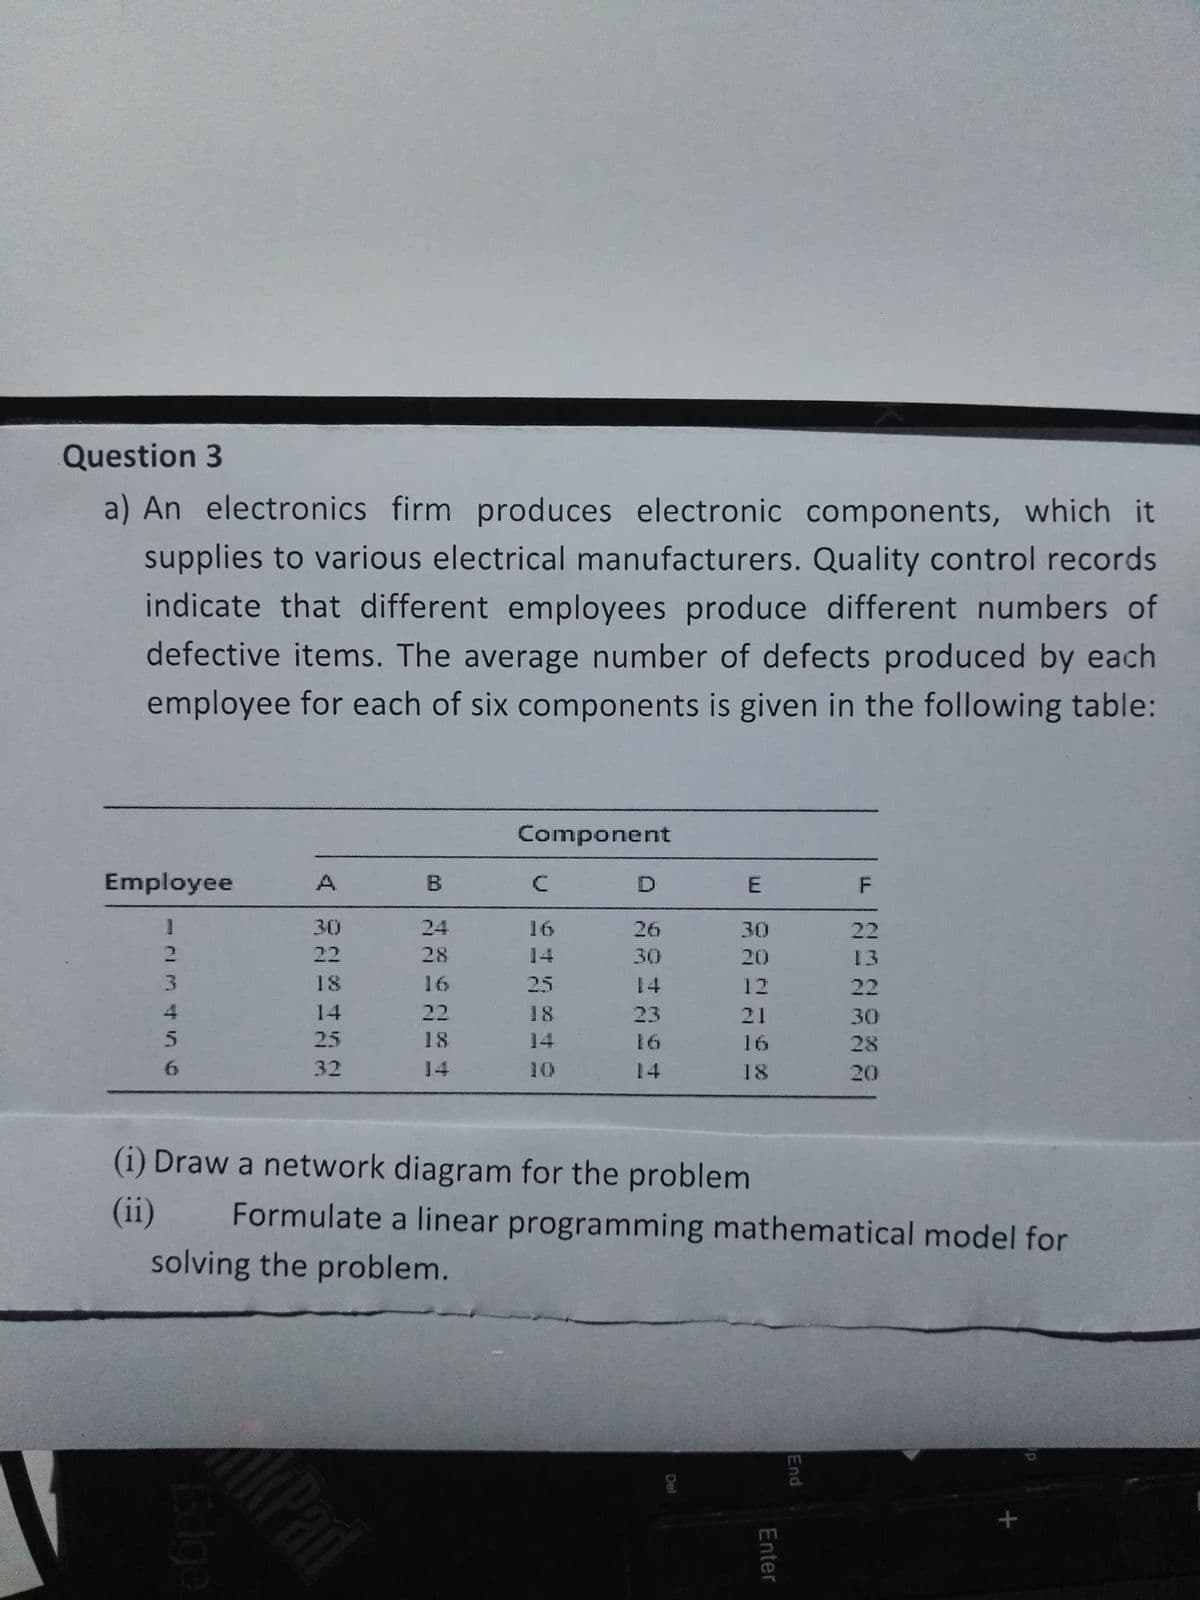 Question 3
a) An electronics firm produces electronic components, which it
supplies to various electrical manufacturers. Quality control records.
indicate that different employees produce different numbers of
defective items. The average number of defects produced by each
employee for each of six components is given in the following table:
Employee
1
2
3
4
5
6
A
30
22
18
14
25
32
B
24
28
22
18
14
Component
C
25
18
D
26
30
14
23
14
E
30
20
12
21
16
18
(i) Draw a network diagram for the problem
(ii)
Del
Formulate a linear programming mathematical model for
solving the problem.
Enter
F
22
13
22
30
28
20
End
+